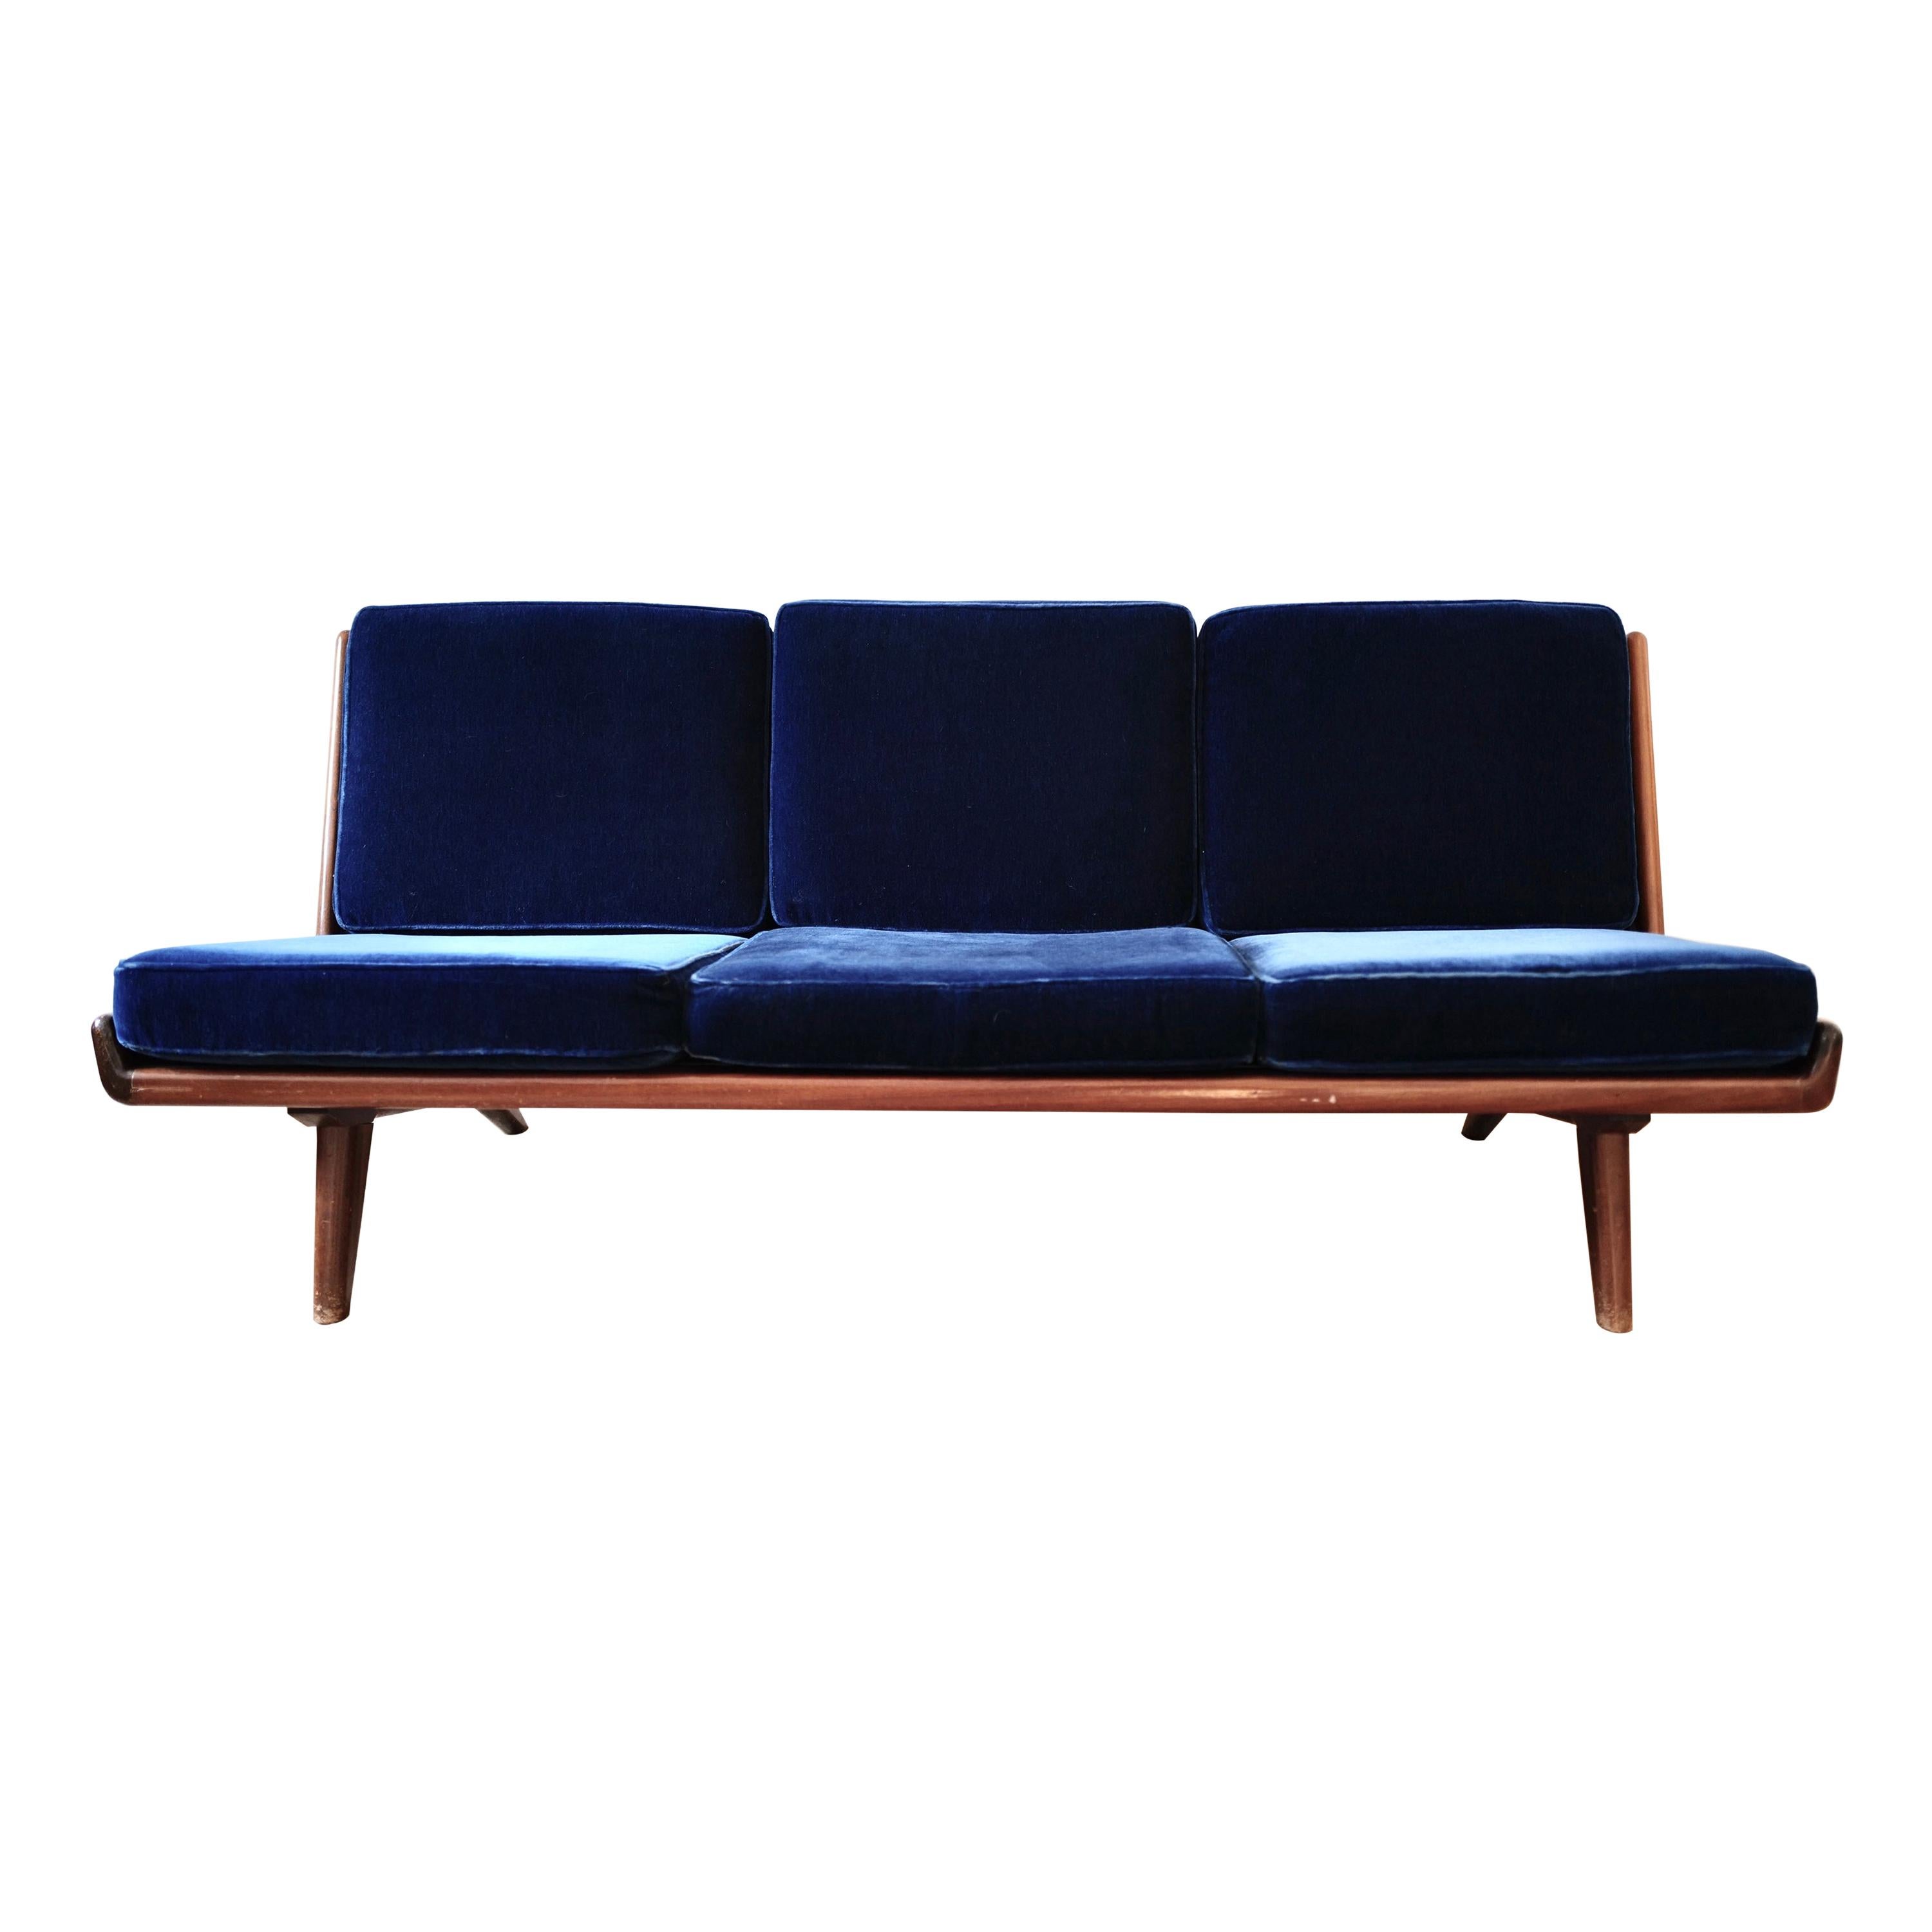 Sofa by Carl Gustav Hiort af Ornäs for Puunveisto OY, Finland, 1950s For Sale